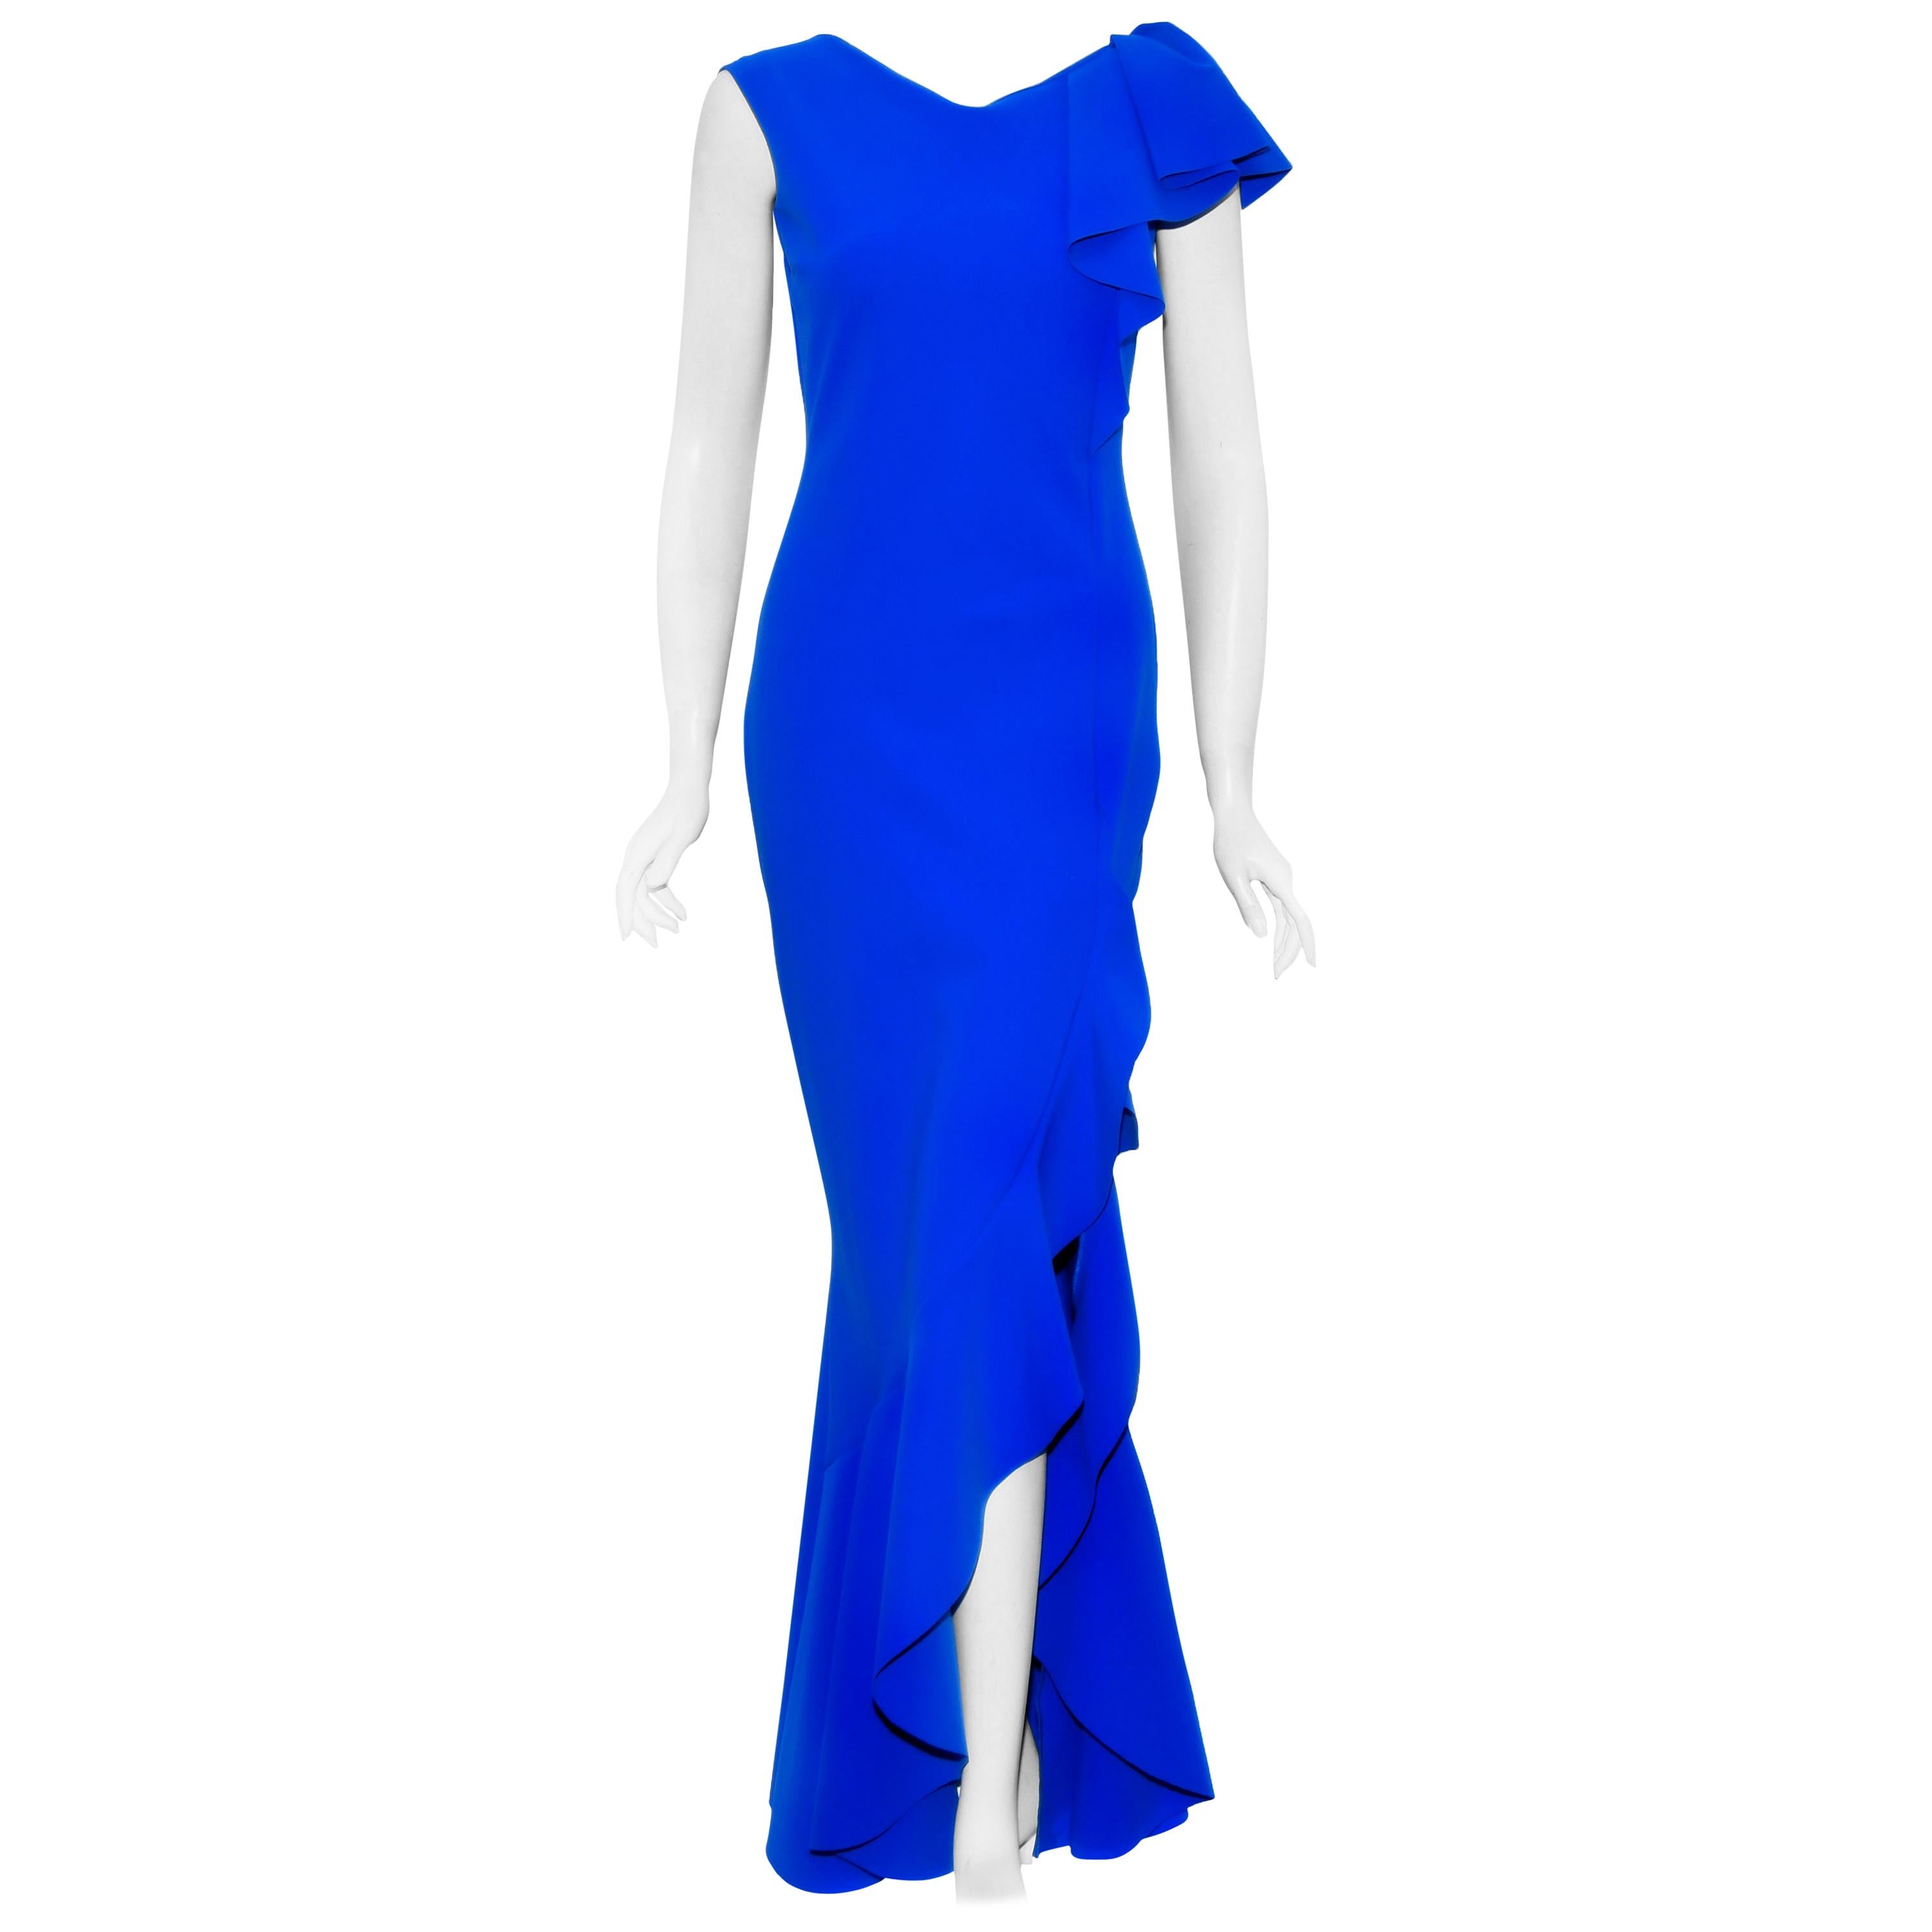 Chiara Boni Royal Blue Sleeveless Asymmetric Ruffle Gown With High Slit At Front For Sale